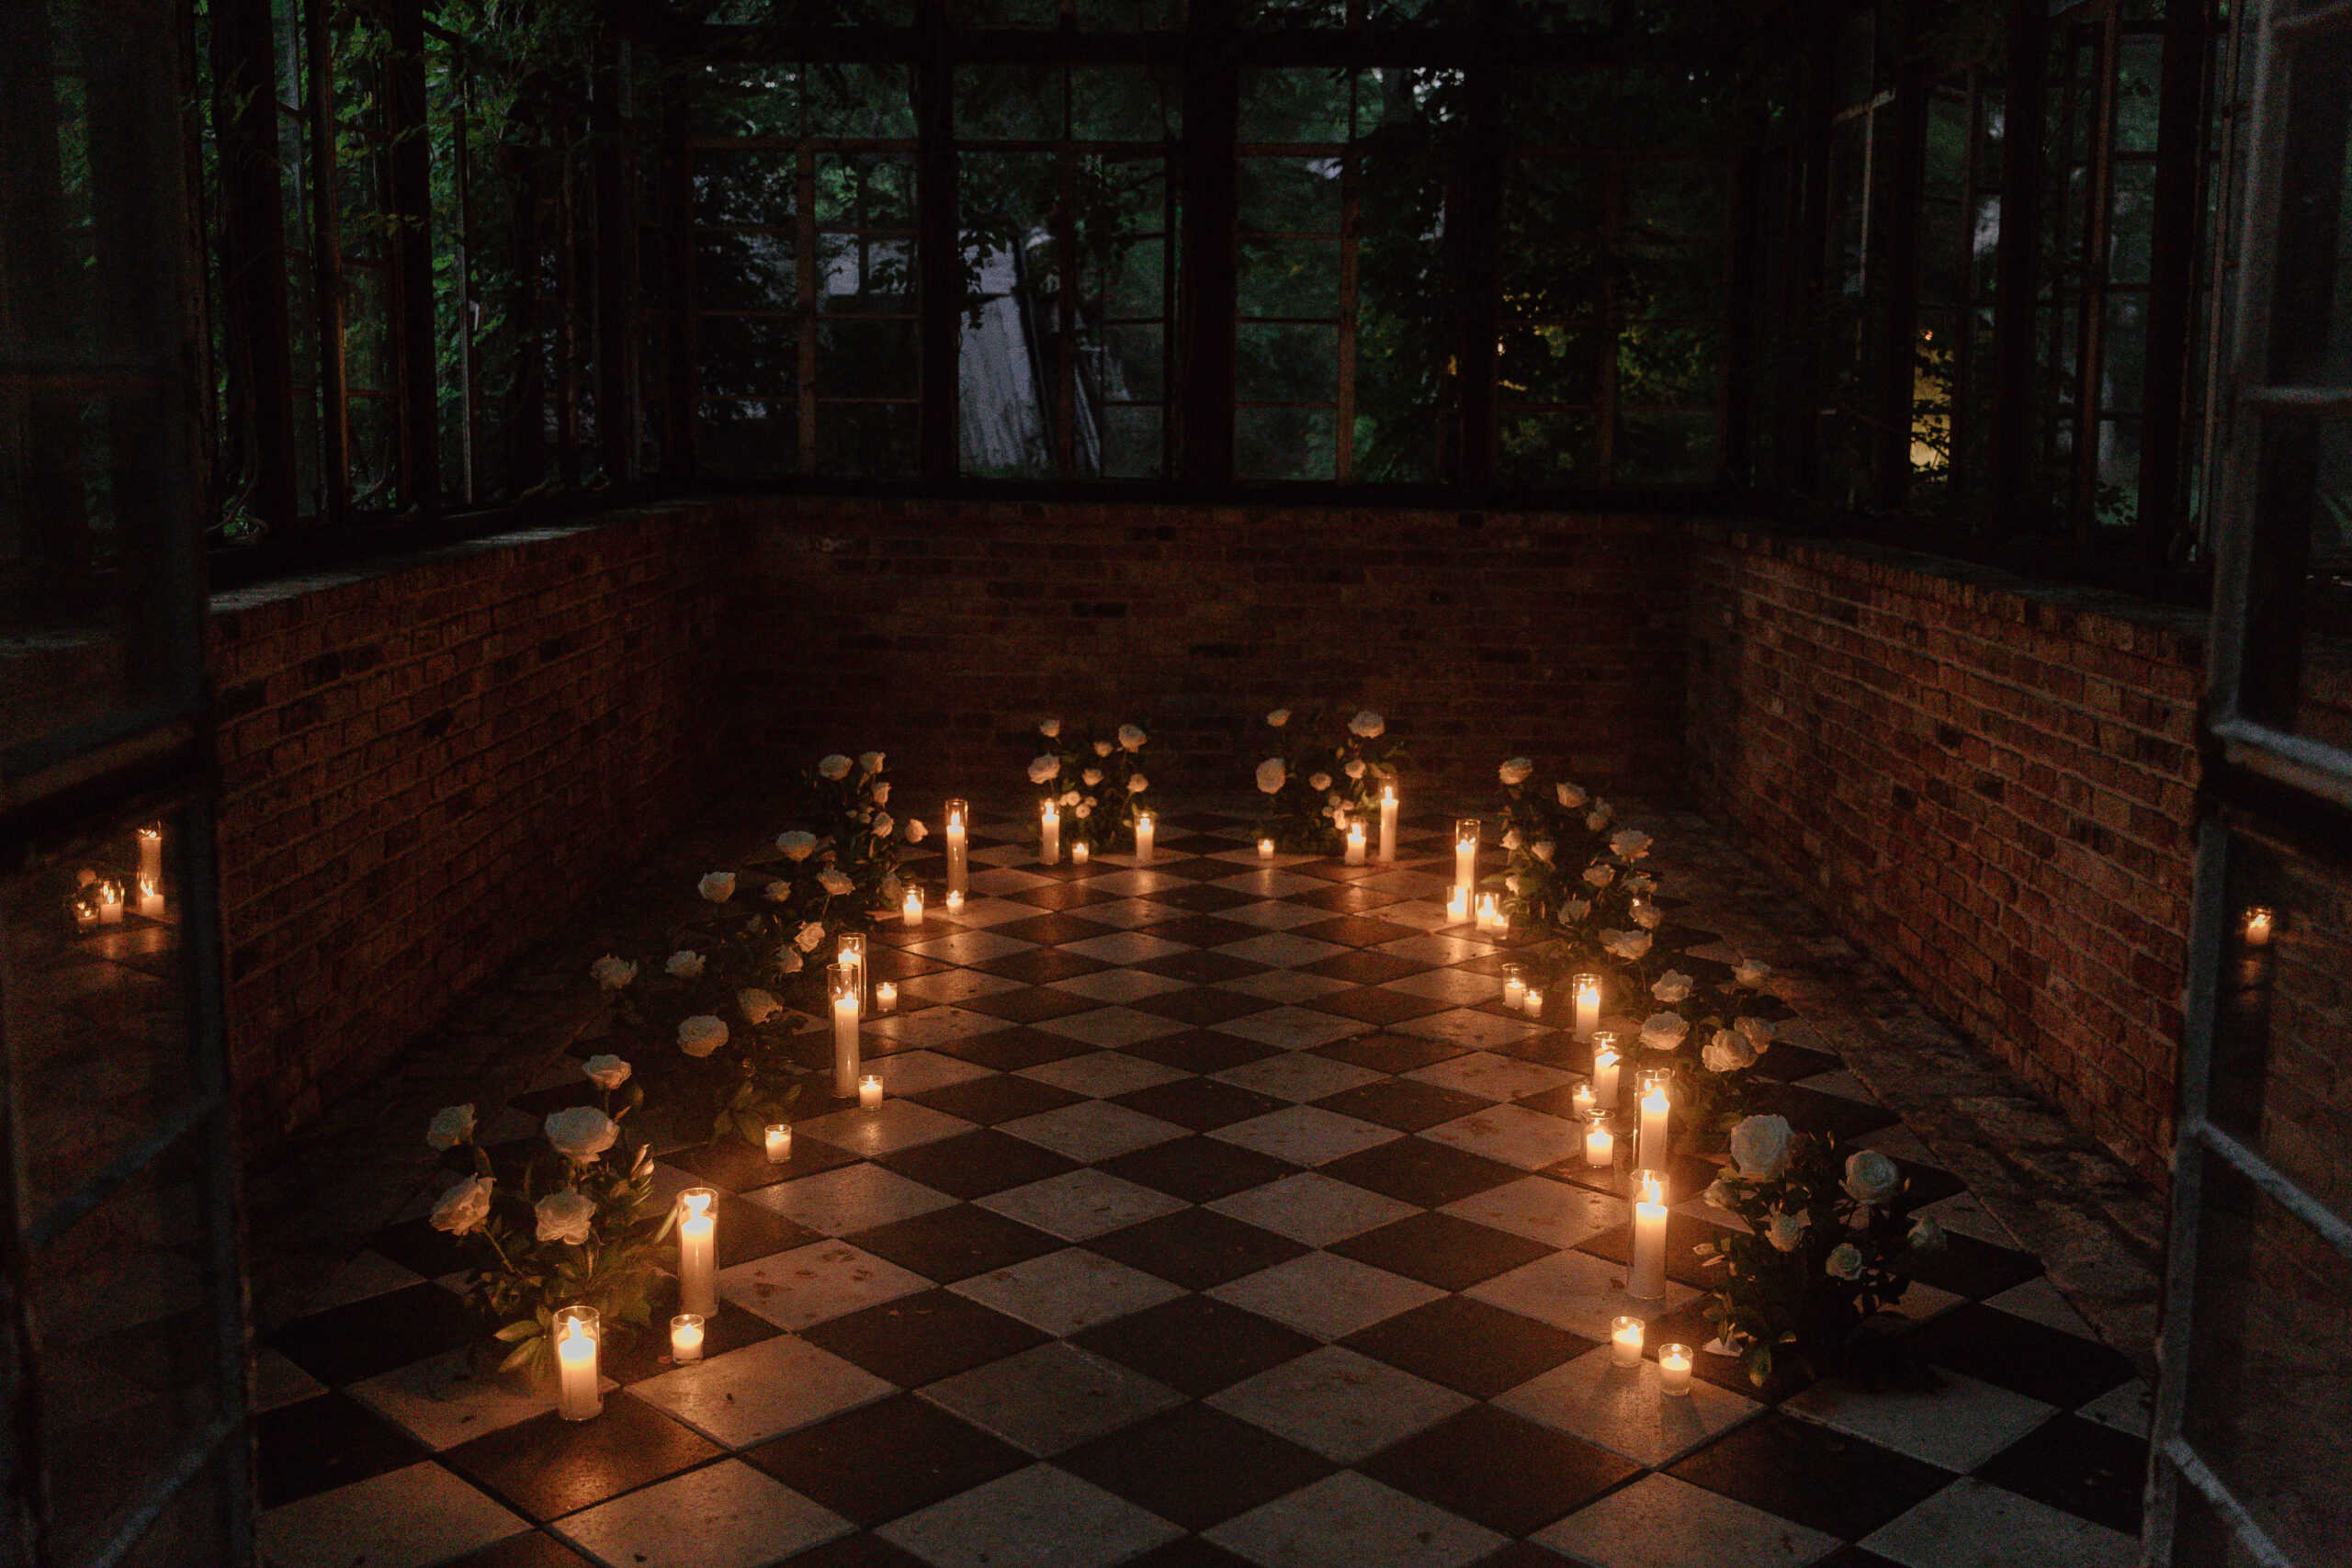 The Sekrit Theater cloaked in candlelight during the evening for a proposal.